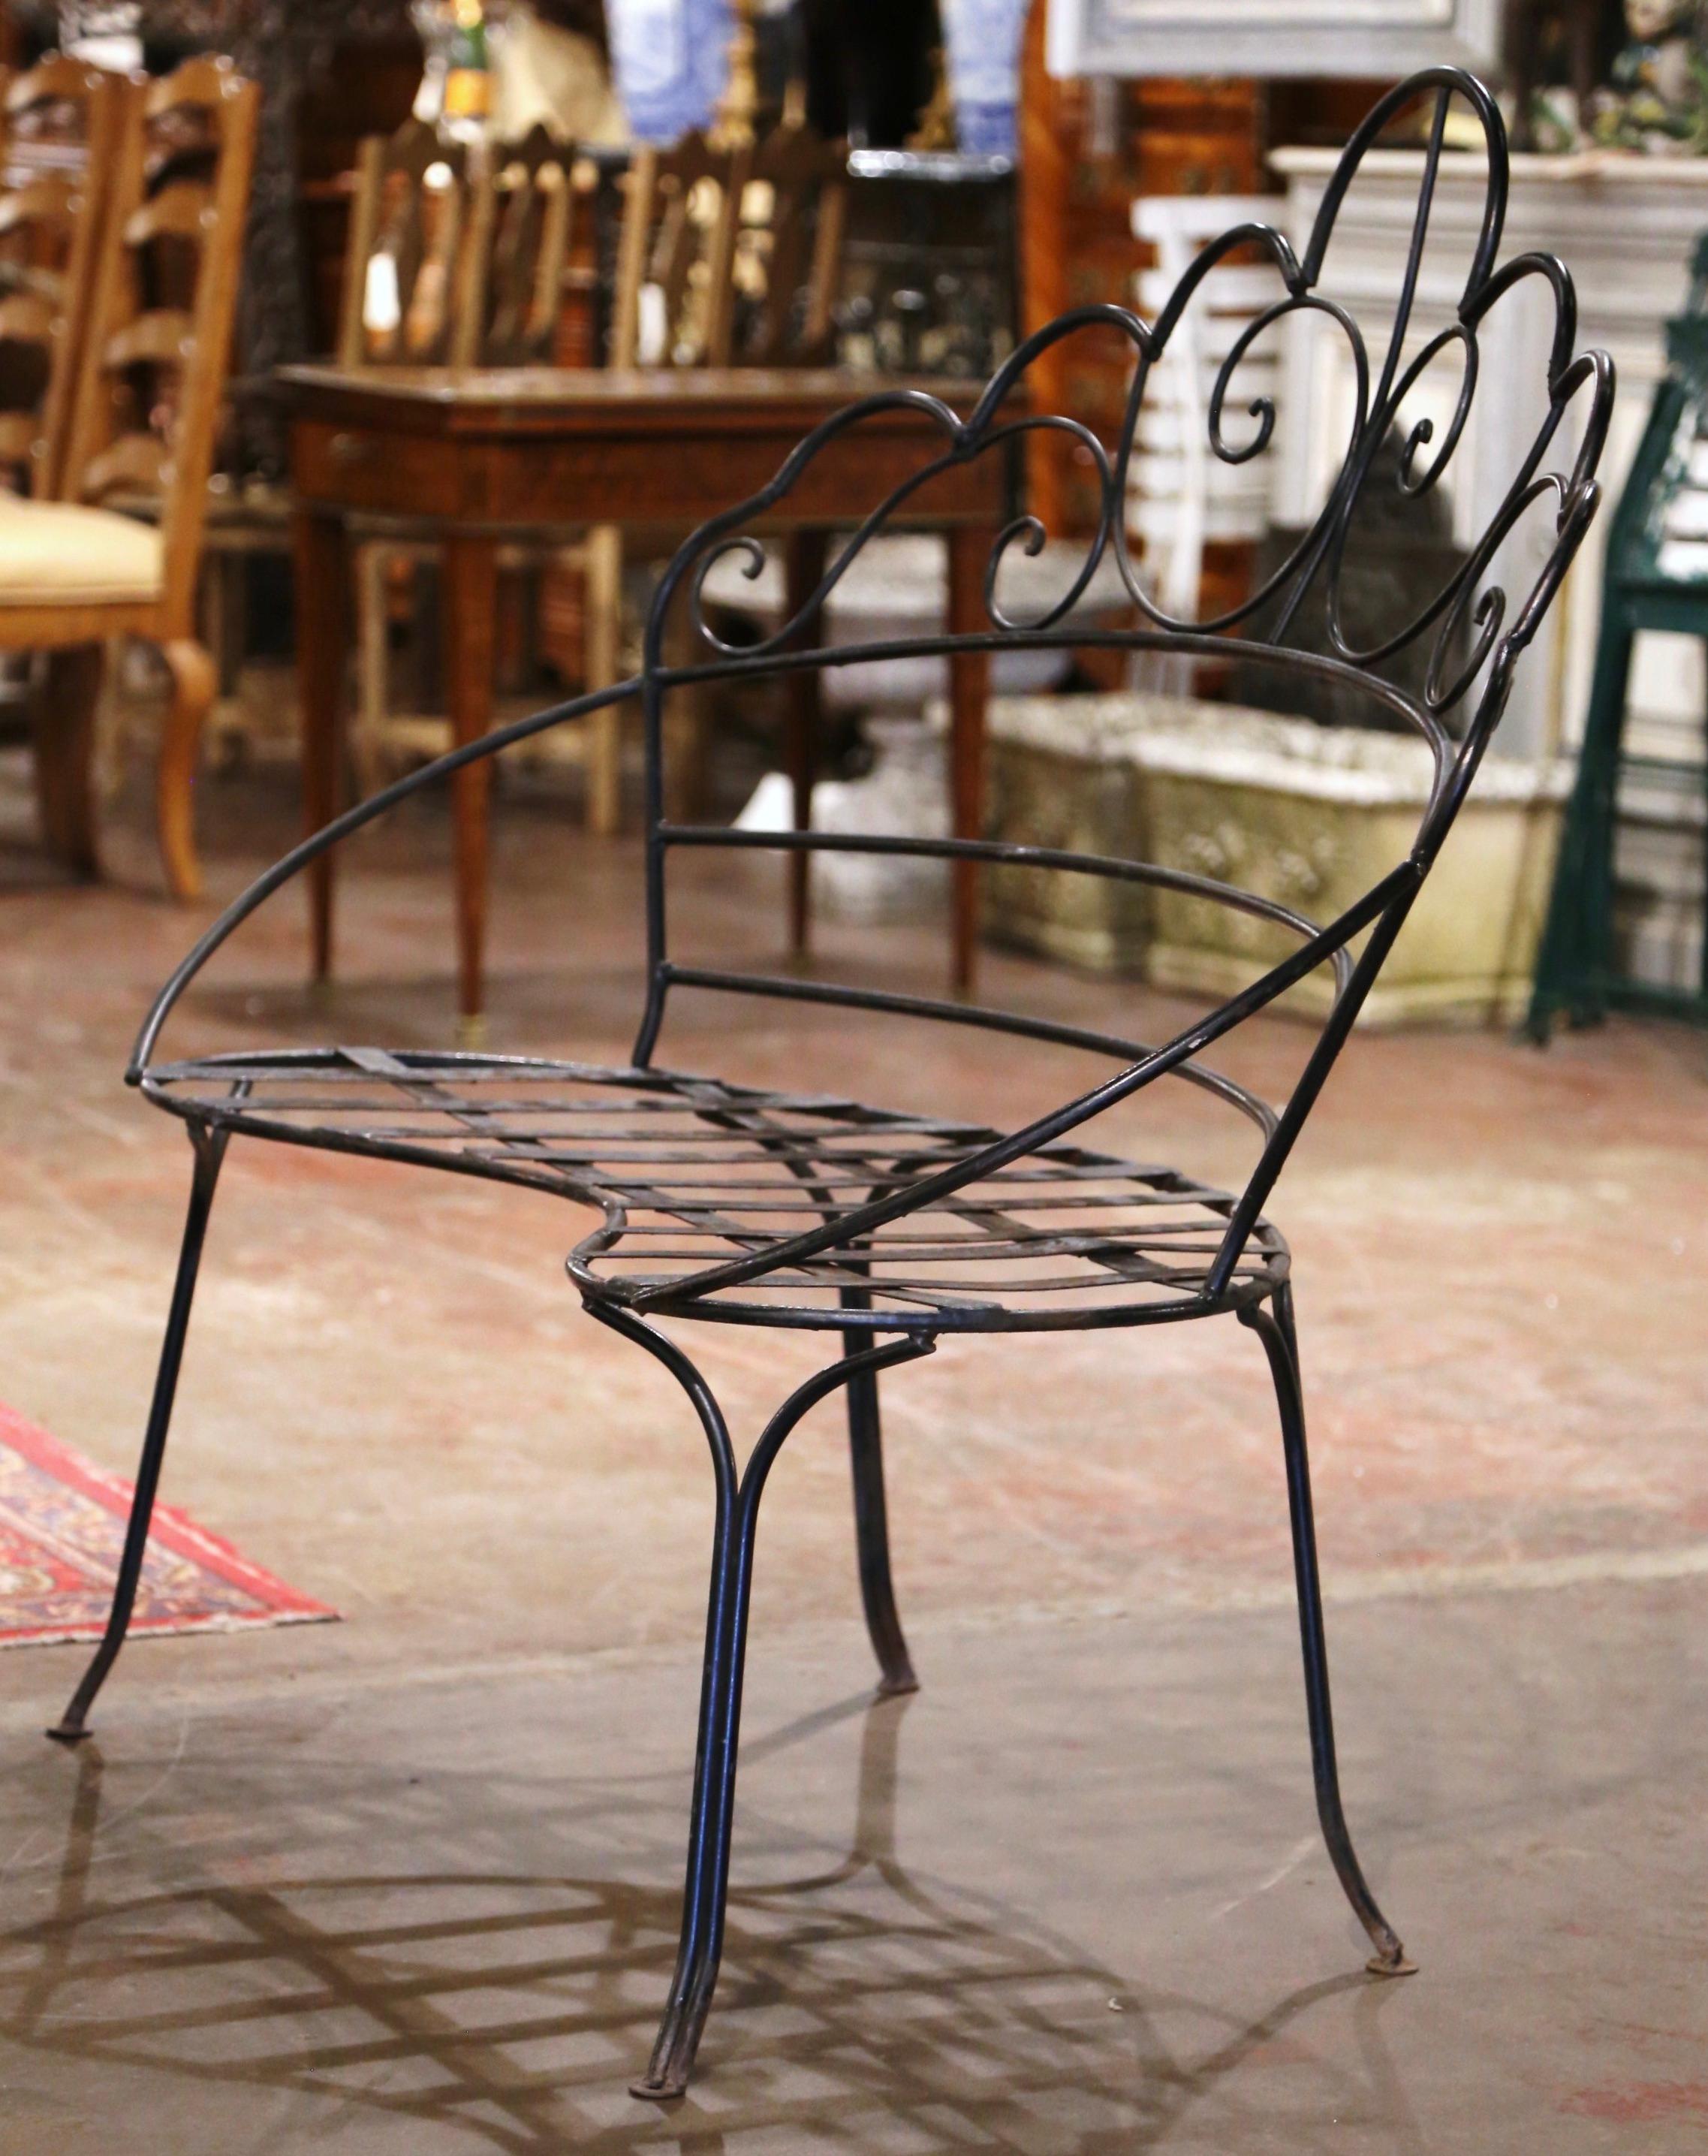 Early 20th Century French Curved Two-Seat Iron Garden Bench Settee from Normandy For Sale 4